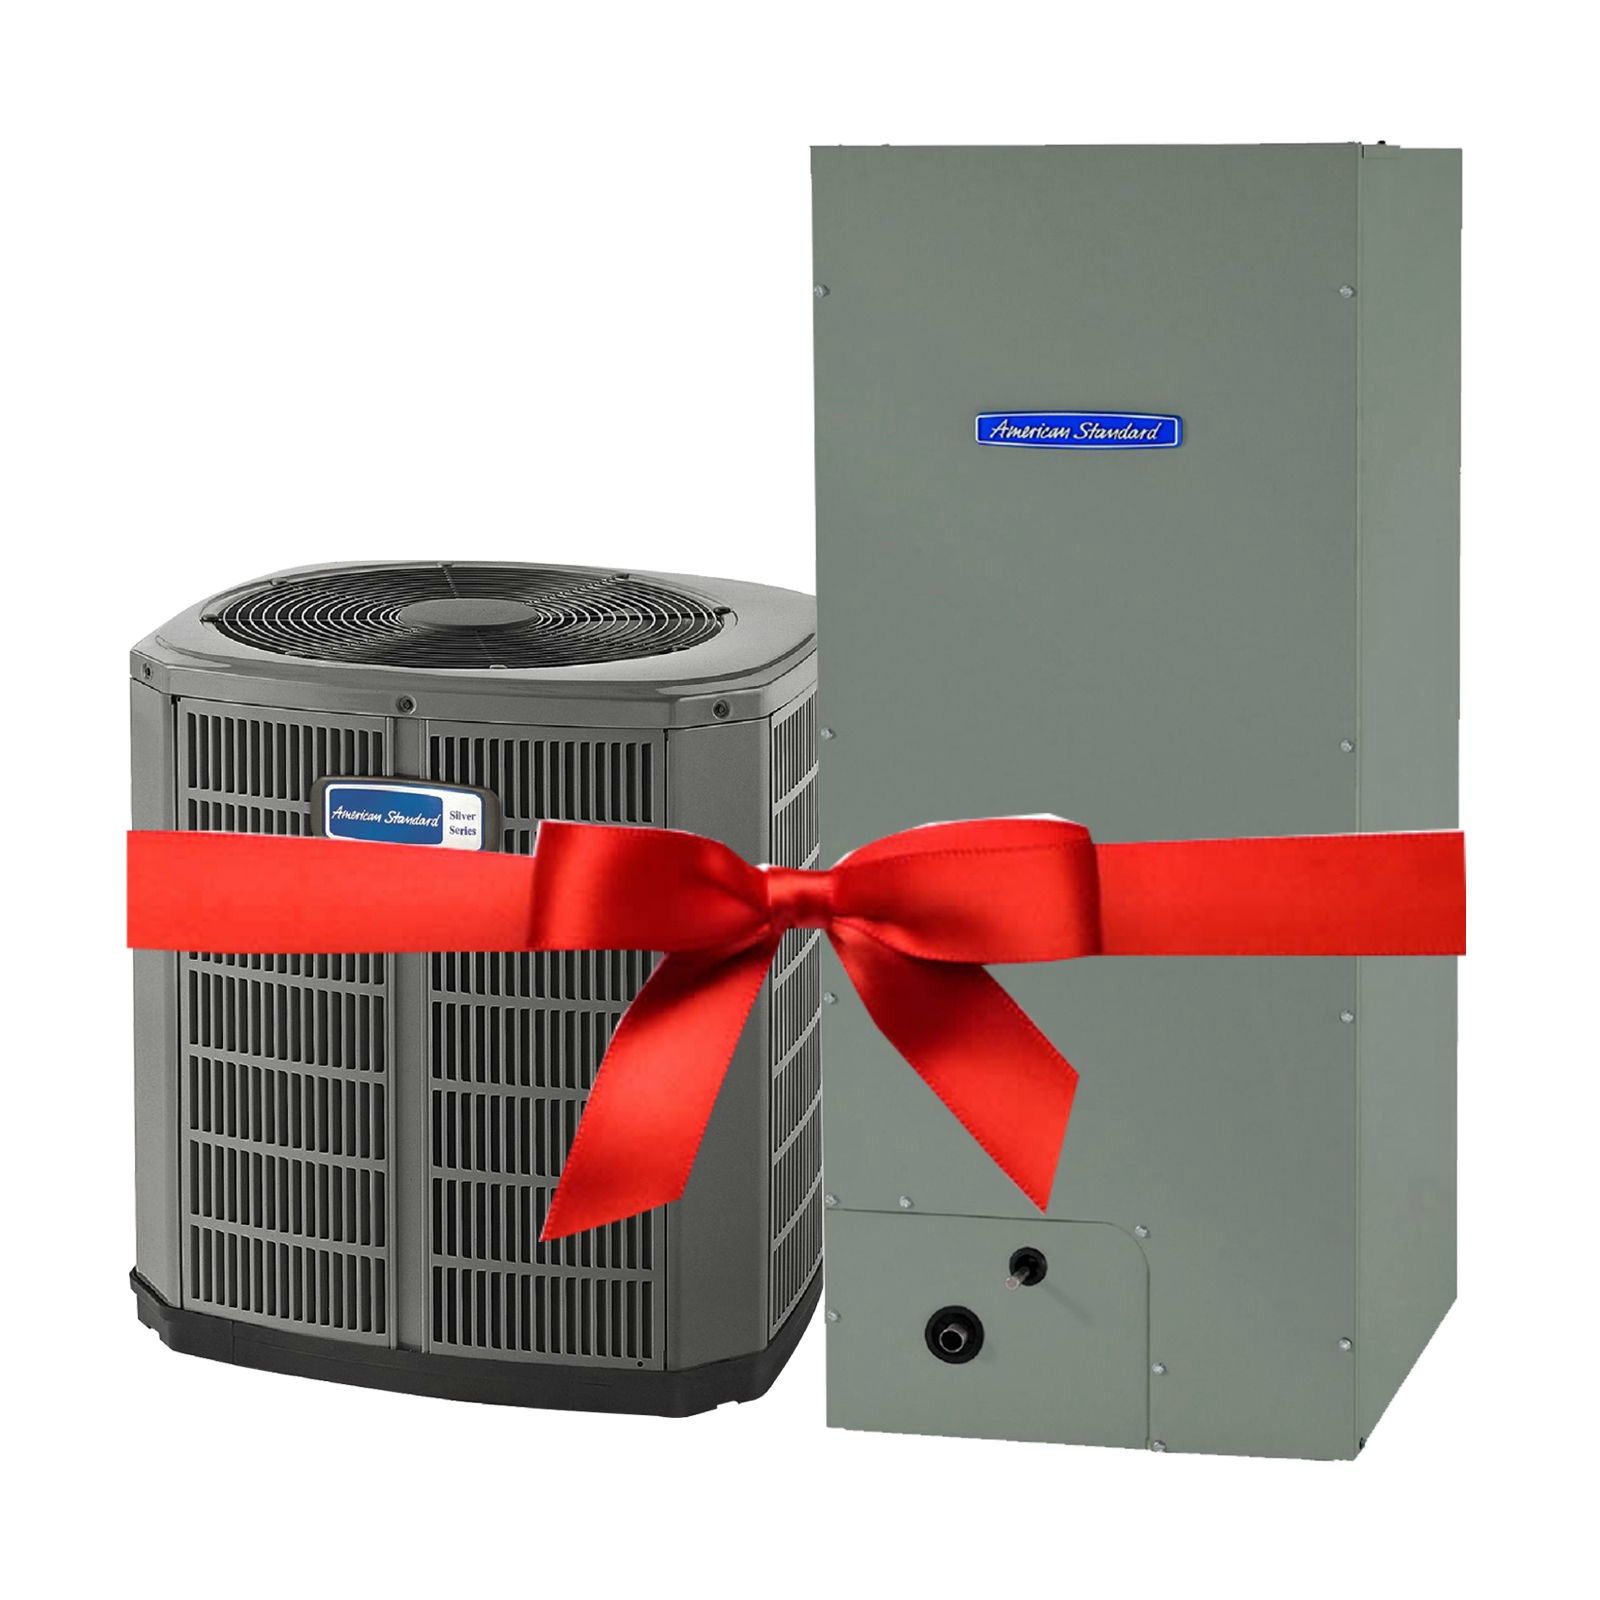 HVAC Repair might not be the best Christmas gift but it can bring you comfort and joy!